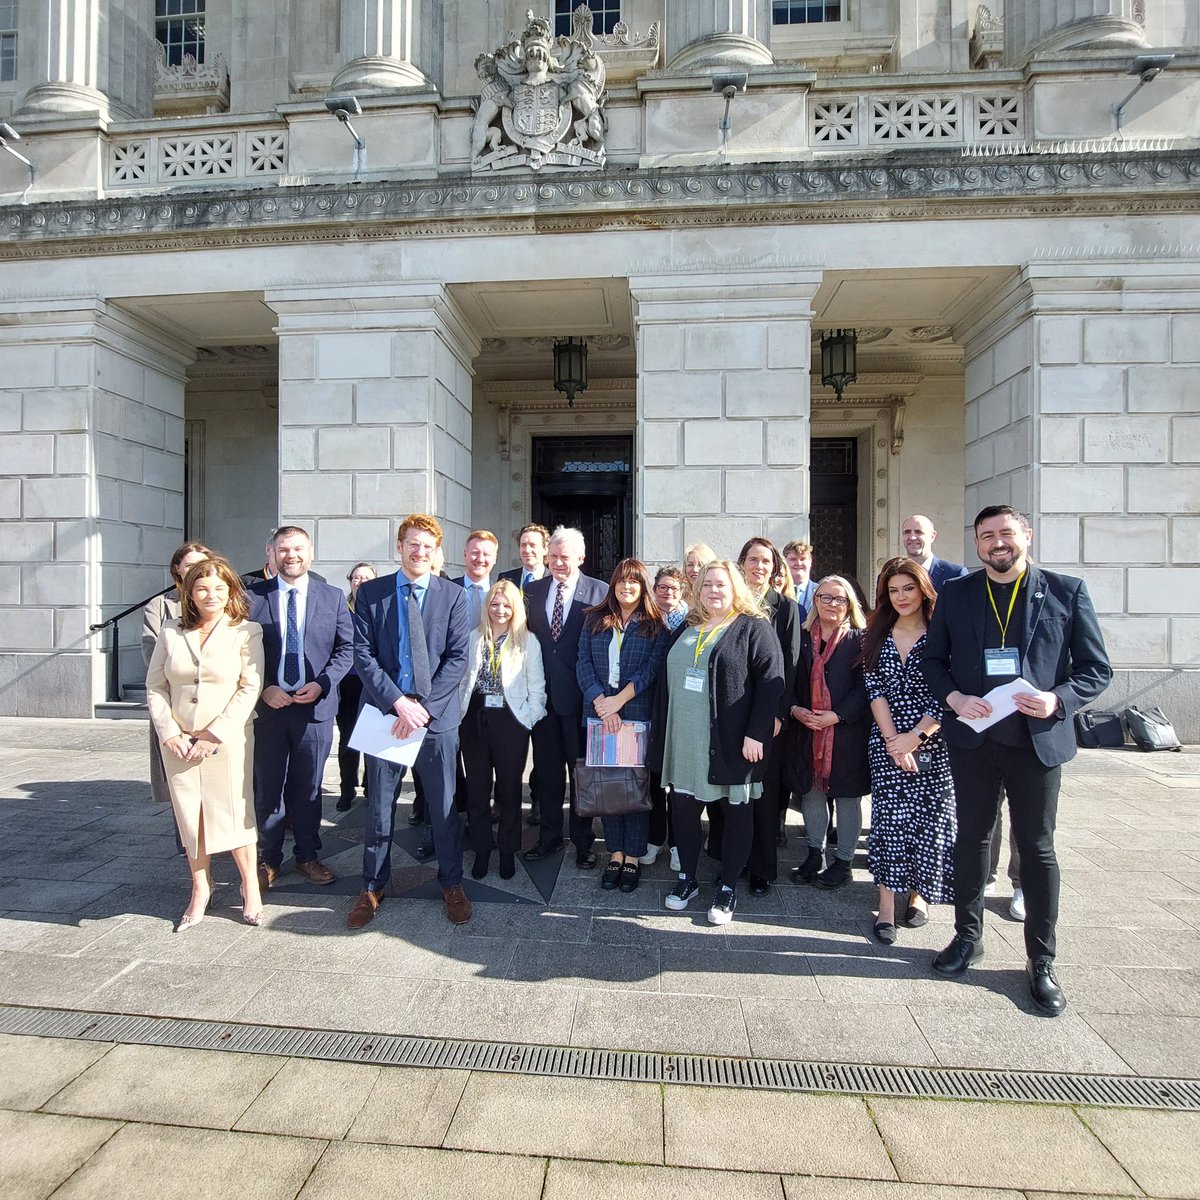 Delighted to be joined by anti-poverty campaigners at Stormont today as we demand Executive action to help families who are struggling. The Executive must listen to the testimony of these groups and act now.